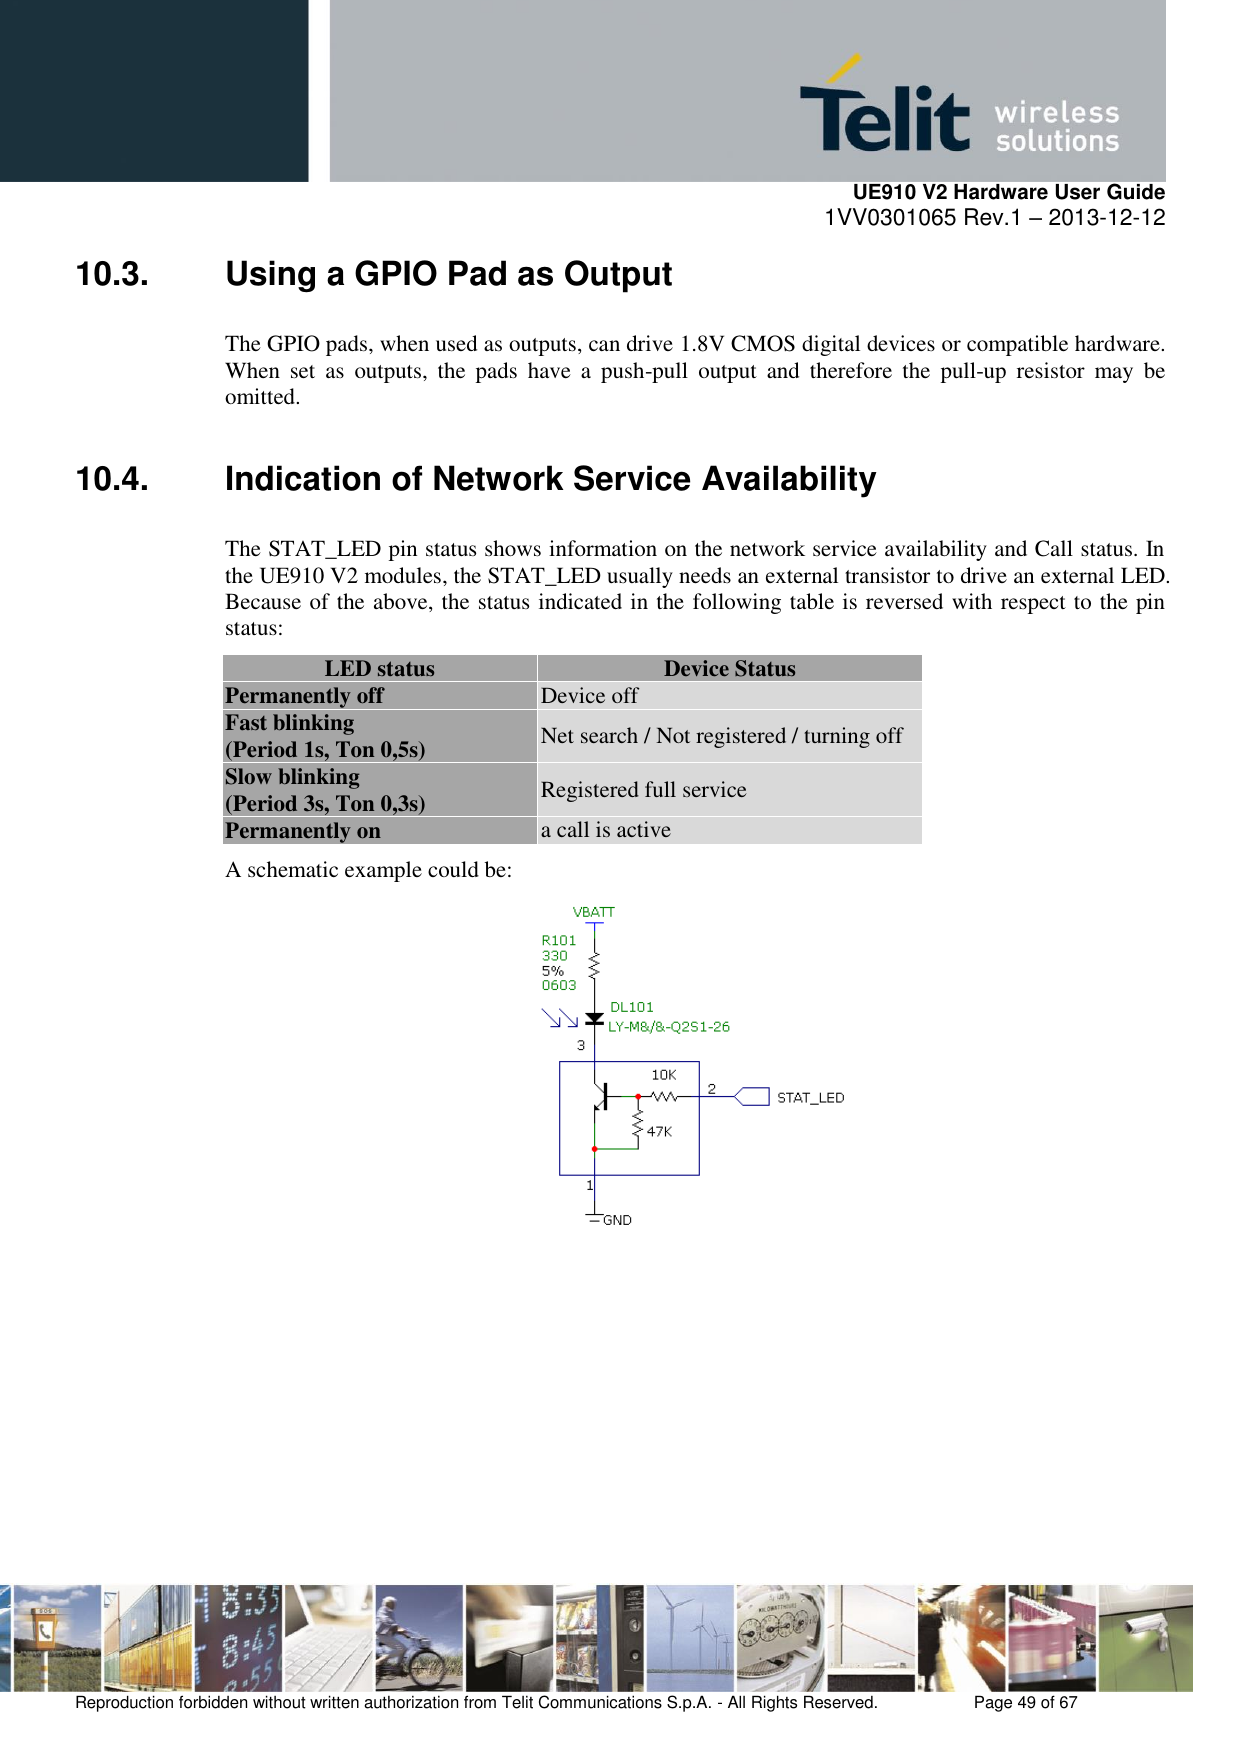     UE910 V2 Hardware User Guide 1VV0301065 Rev.1 – 2013-12-12  Reproduction forbidden without written authorization from Telit Communications S.p.A. - All Rights Reserved.    Page 49 of 67                                                     10.3.  Using a GPIO Pad as Output The GPIO pads, when used as outputs, can drive 1.8V CMOS digital devices or compatible hardware. When  set  as  outputs,  the  pads  have  a  push-pull  output  and  therefore  the  pull-up  resistor  may  be omitted. 10.4.  Indication of Network Service Availability The STAT_LED pin status shows information on the network service availability and Call status. In the UE910 V2 modules, the STAT_LED usually needs an external transistor to drive an external LED. Because of the above, the status indicated in the following table is reversed with respect to the pin status: LED status Device Status Permanently off Device off Fast blinking (Period 1s, Ton 0,5s) Net search / Not registered / turning off Slow blinking (Period 3s, Ton 0,3s) Registered full service Permanently on a call is active A schematic example could be:       